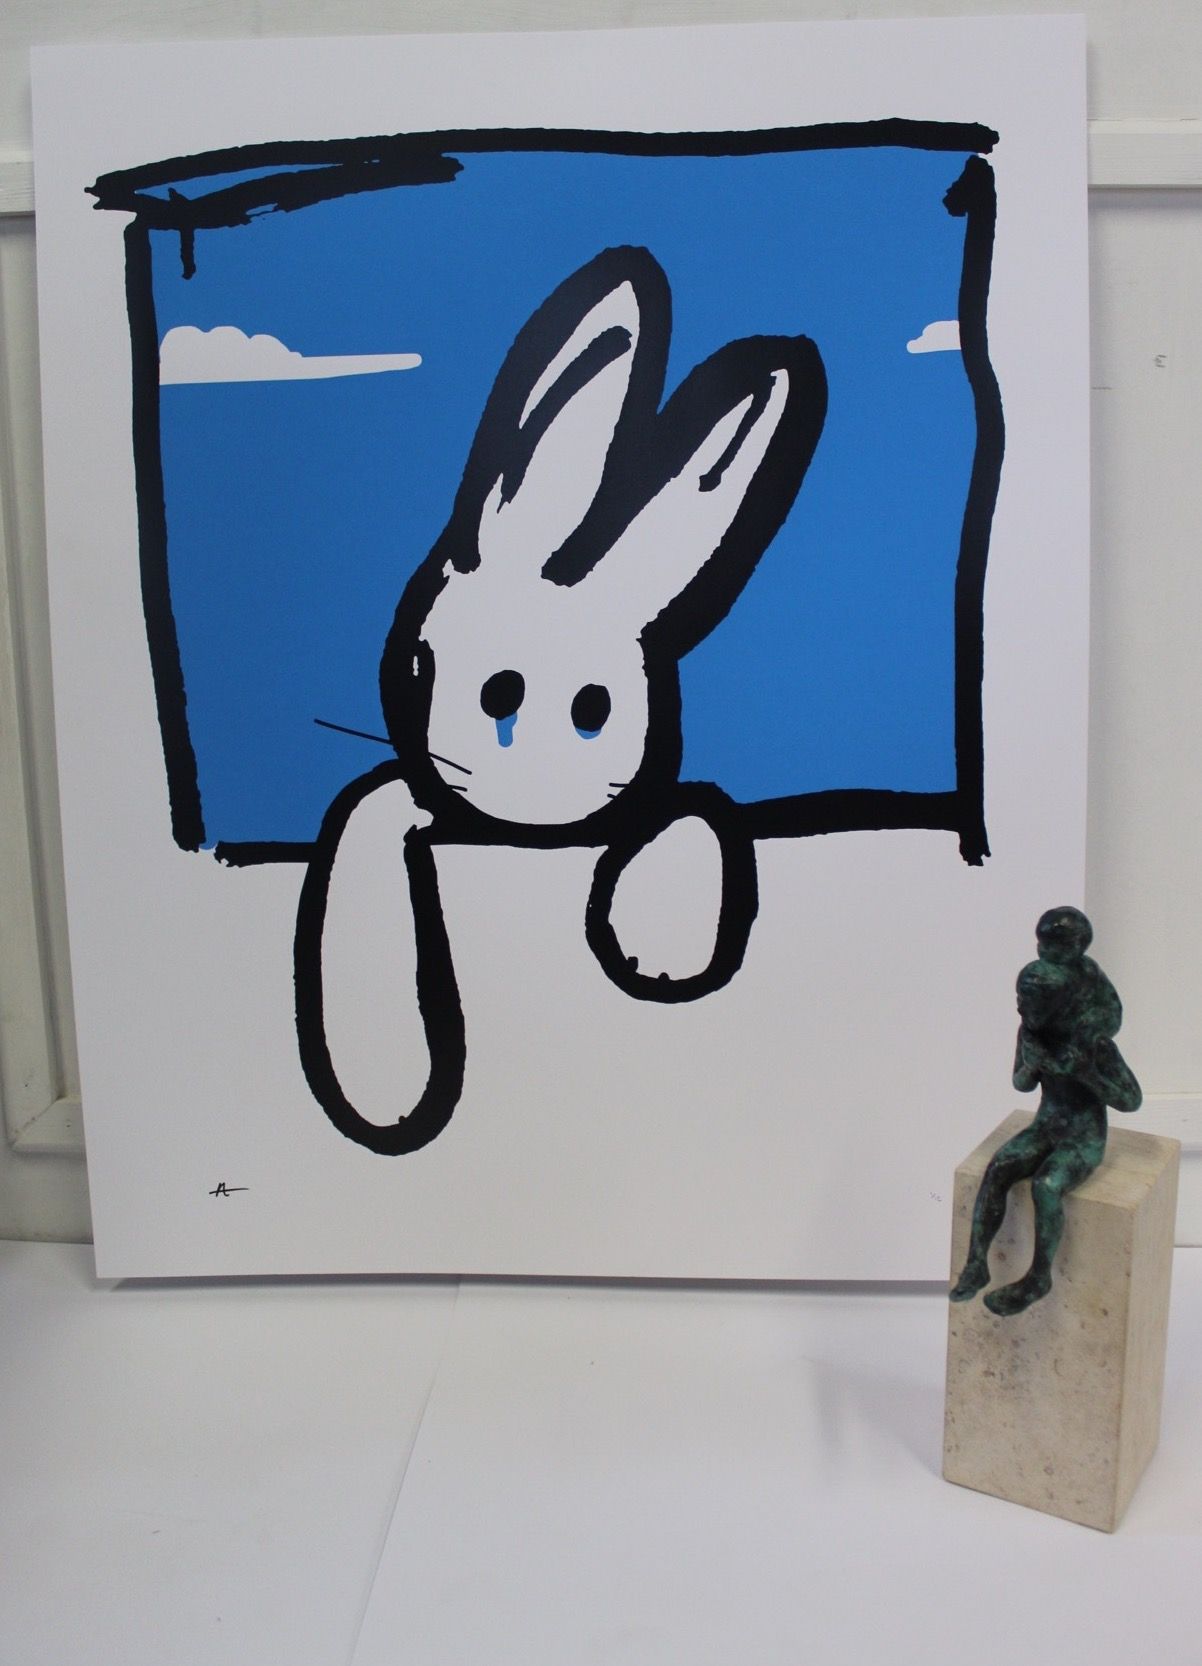 Rabbit For Keith #2 by Harry Bunce